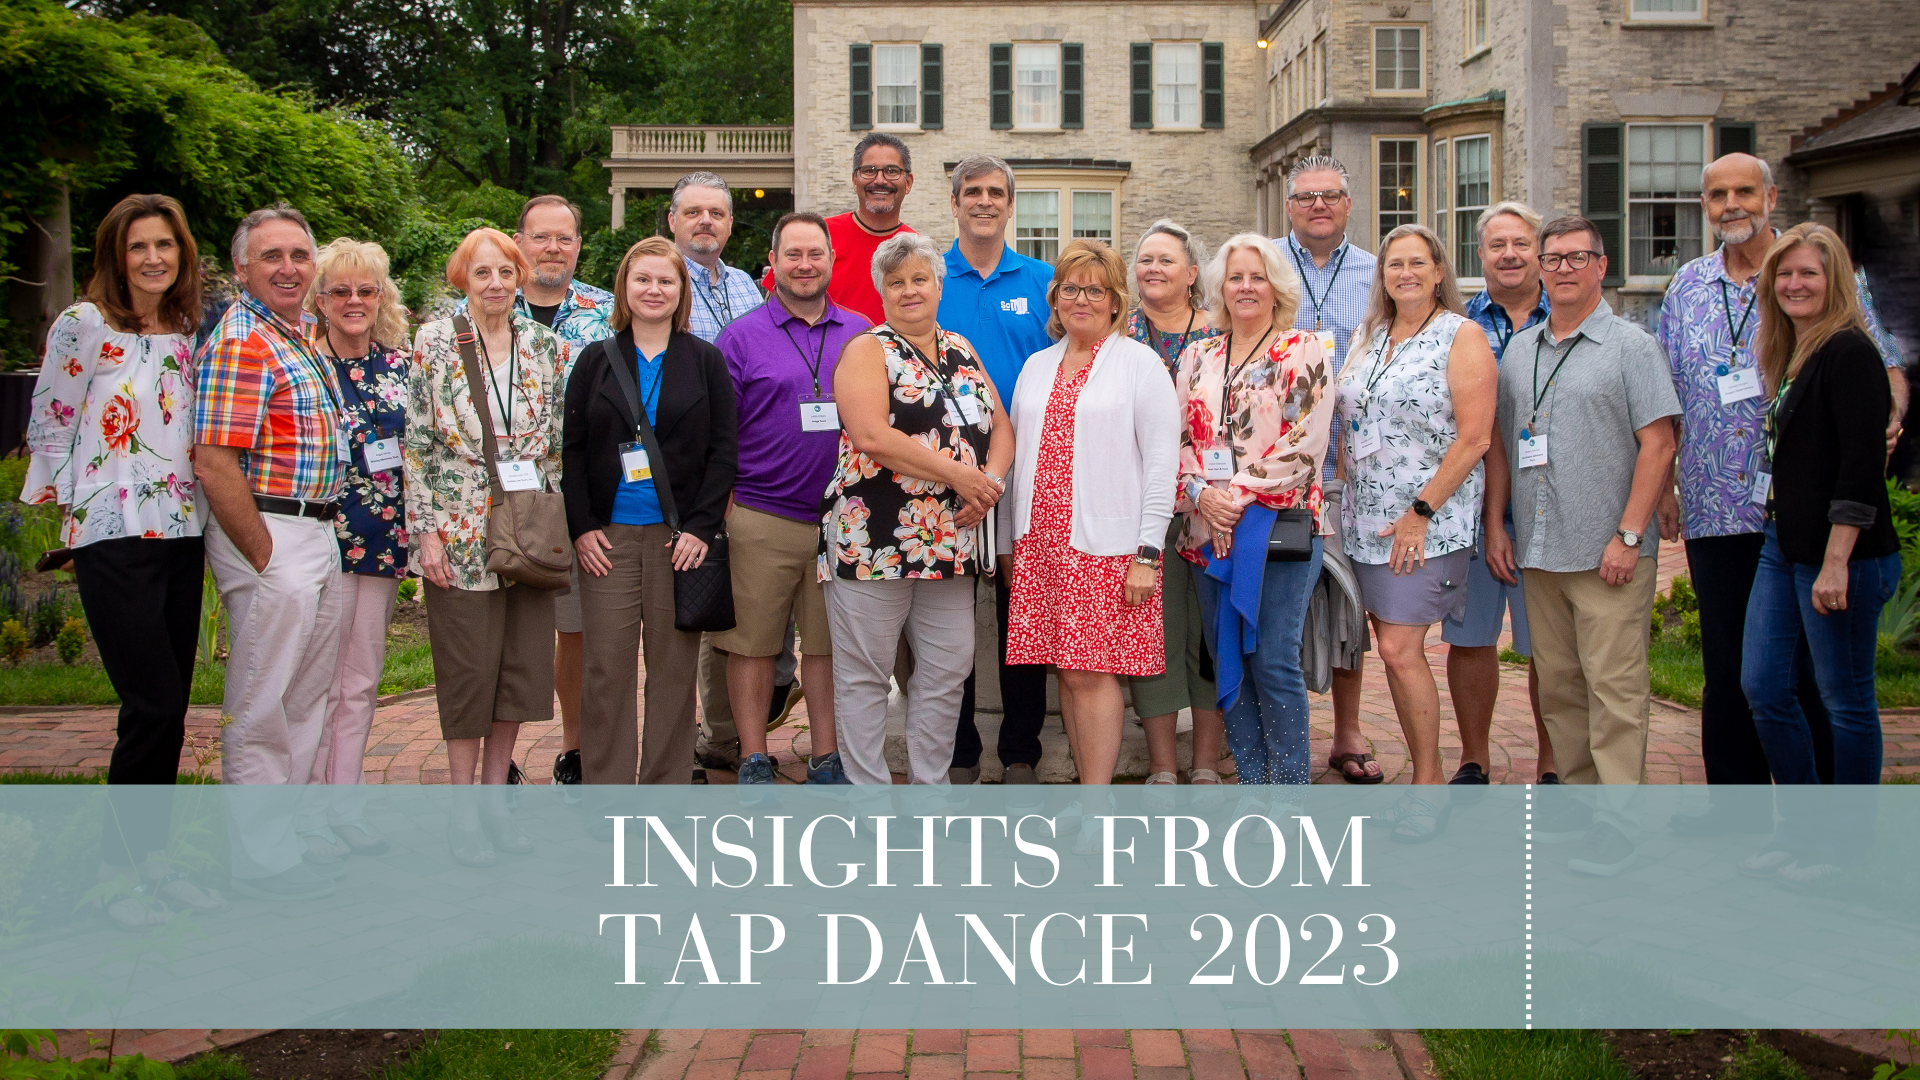 A group photo outdoors in front of a stone building with green bushes on the left. An overlaid title reads "Insights from TAP Dance 2023"